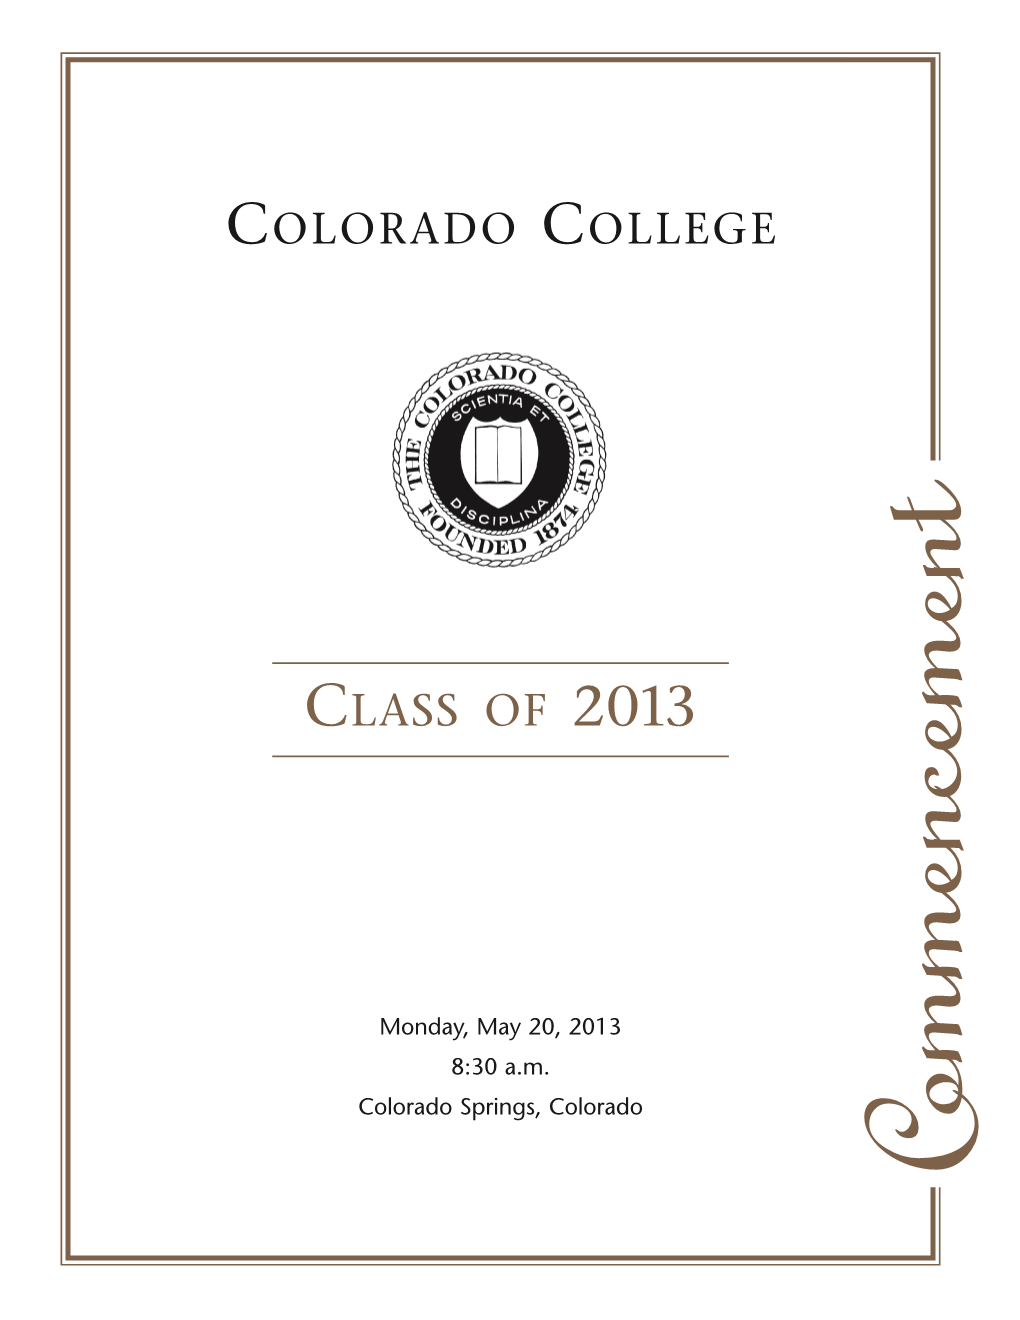 Commencement • May 20, 2013, 8:30 A.M